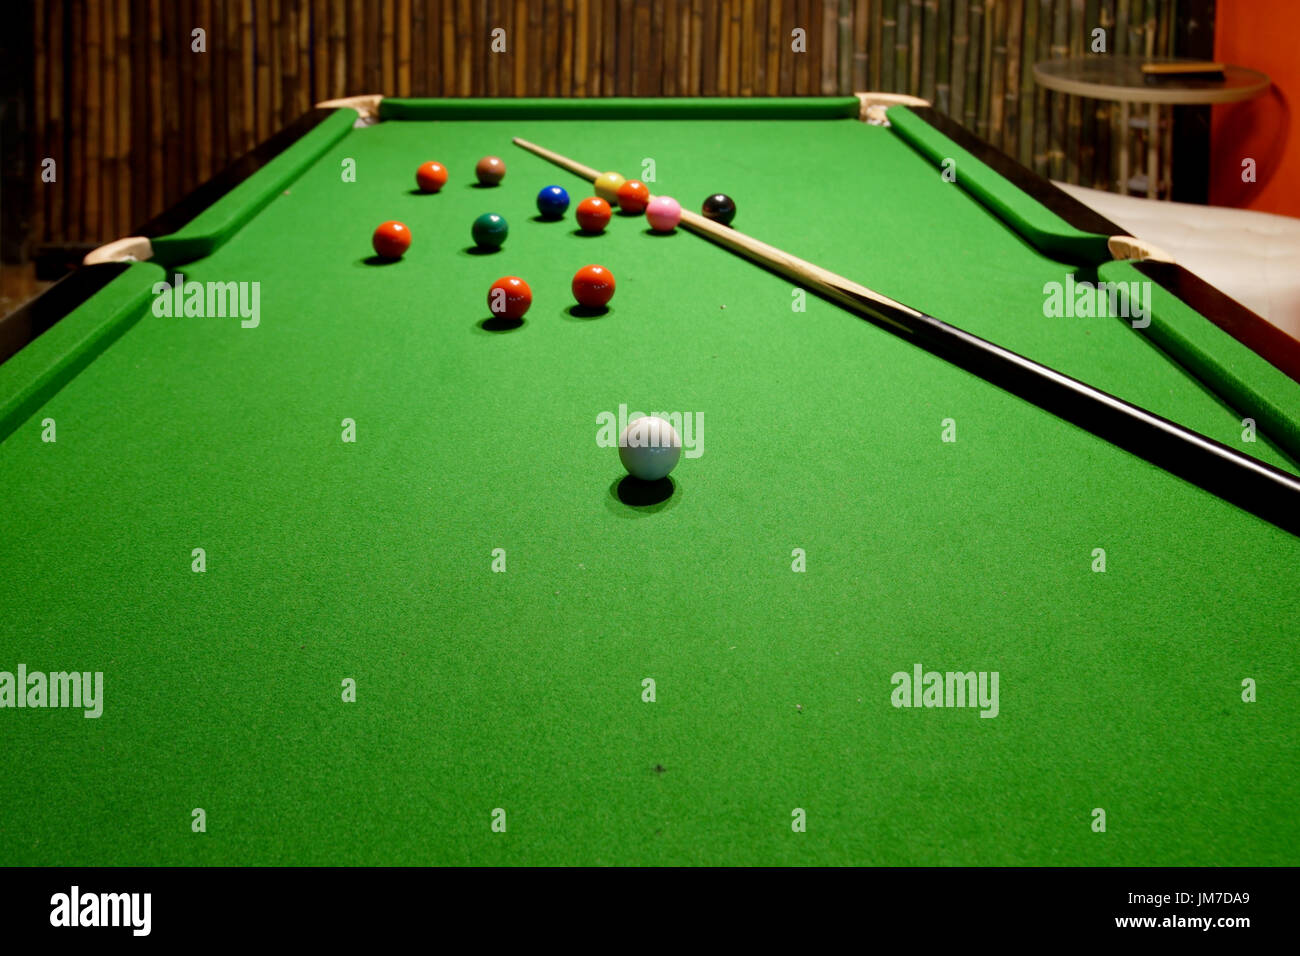 snooker balls and cue on snooker table Stock Photo